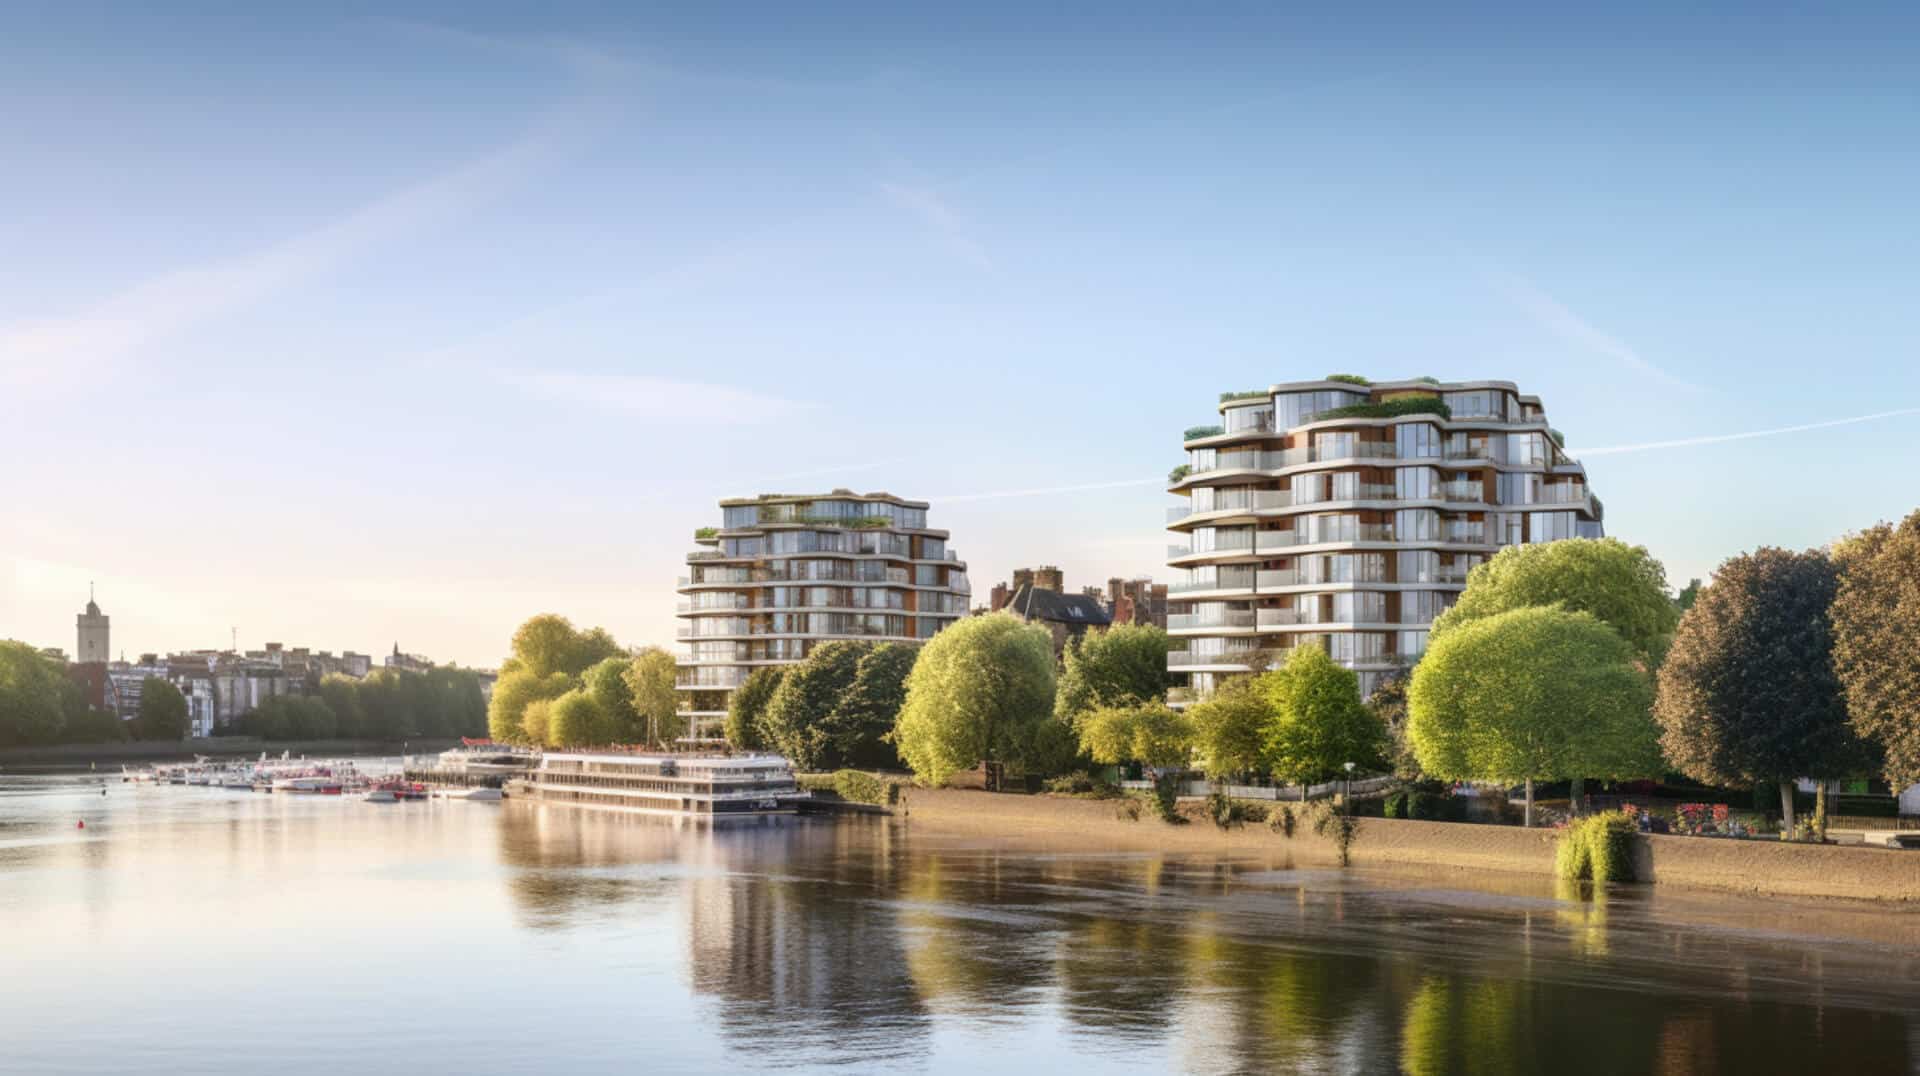 001 putney apartments with iconic bridge and river backdrop 0 0